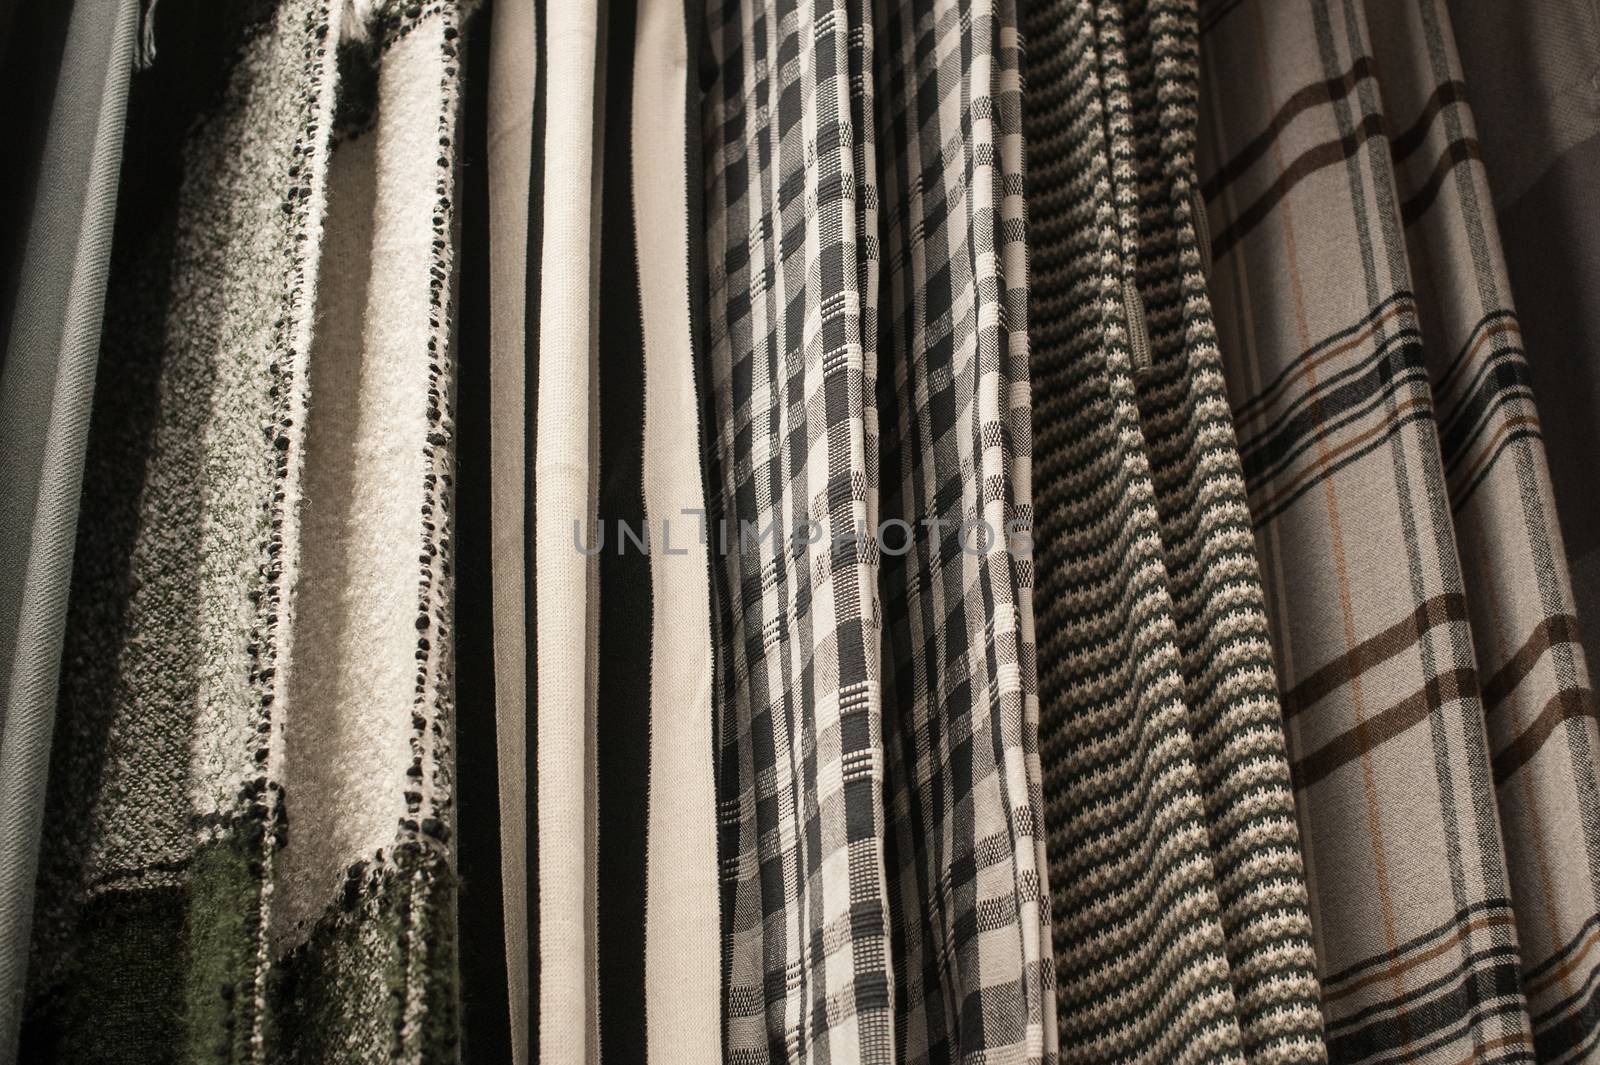 Texture sets of fabrics hang on the trempel in the closet by timonko